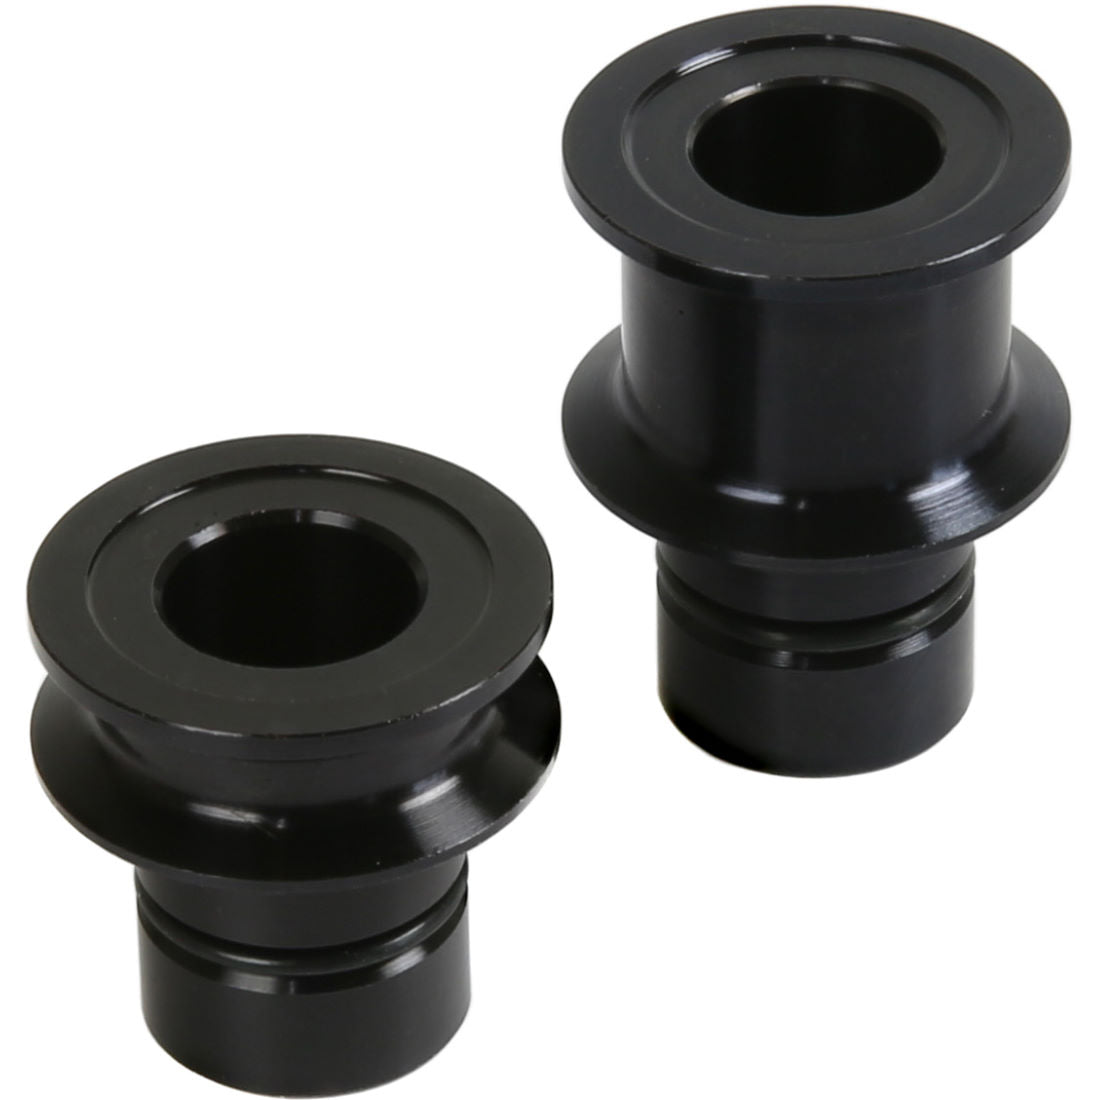 Hope Pro 2 Evo/Pro 4 15Mm 110Mm/Boost Conversion Spacer